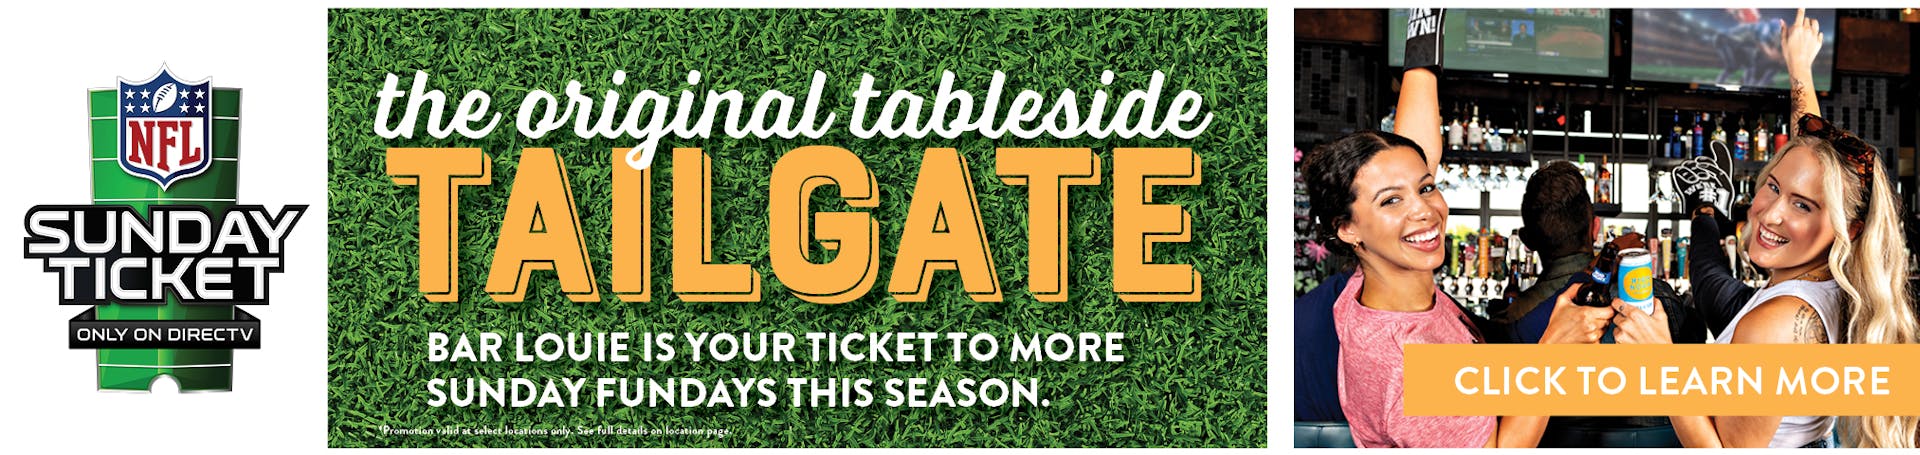 the original tableside tailgate Bar Louie is your ticket to the more Sunday Fundays this season.